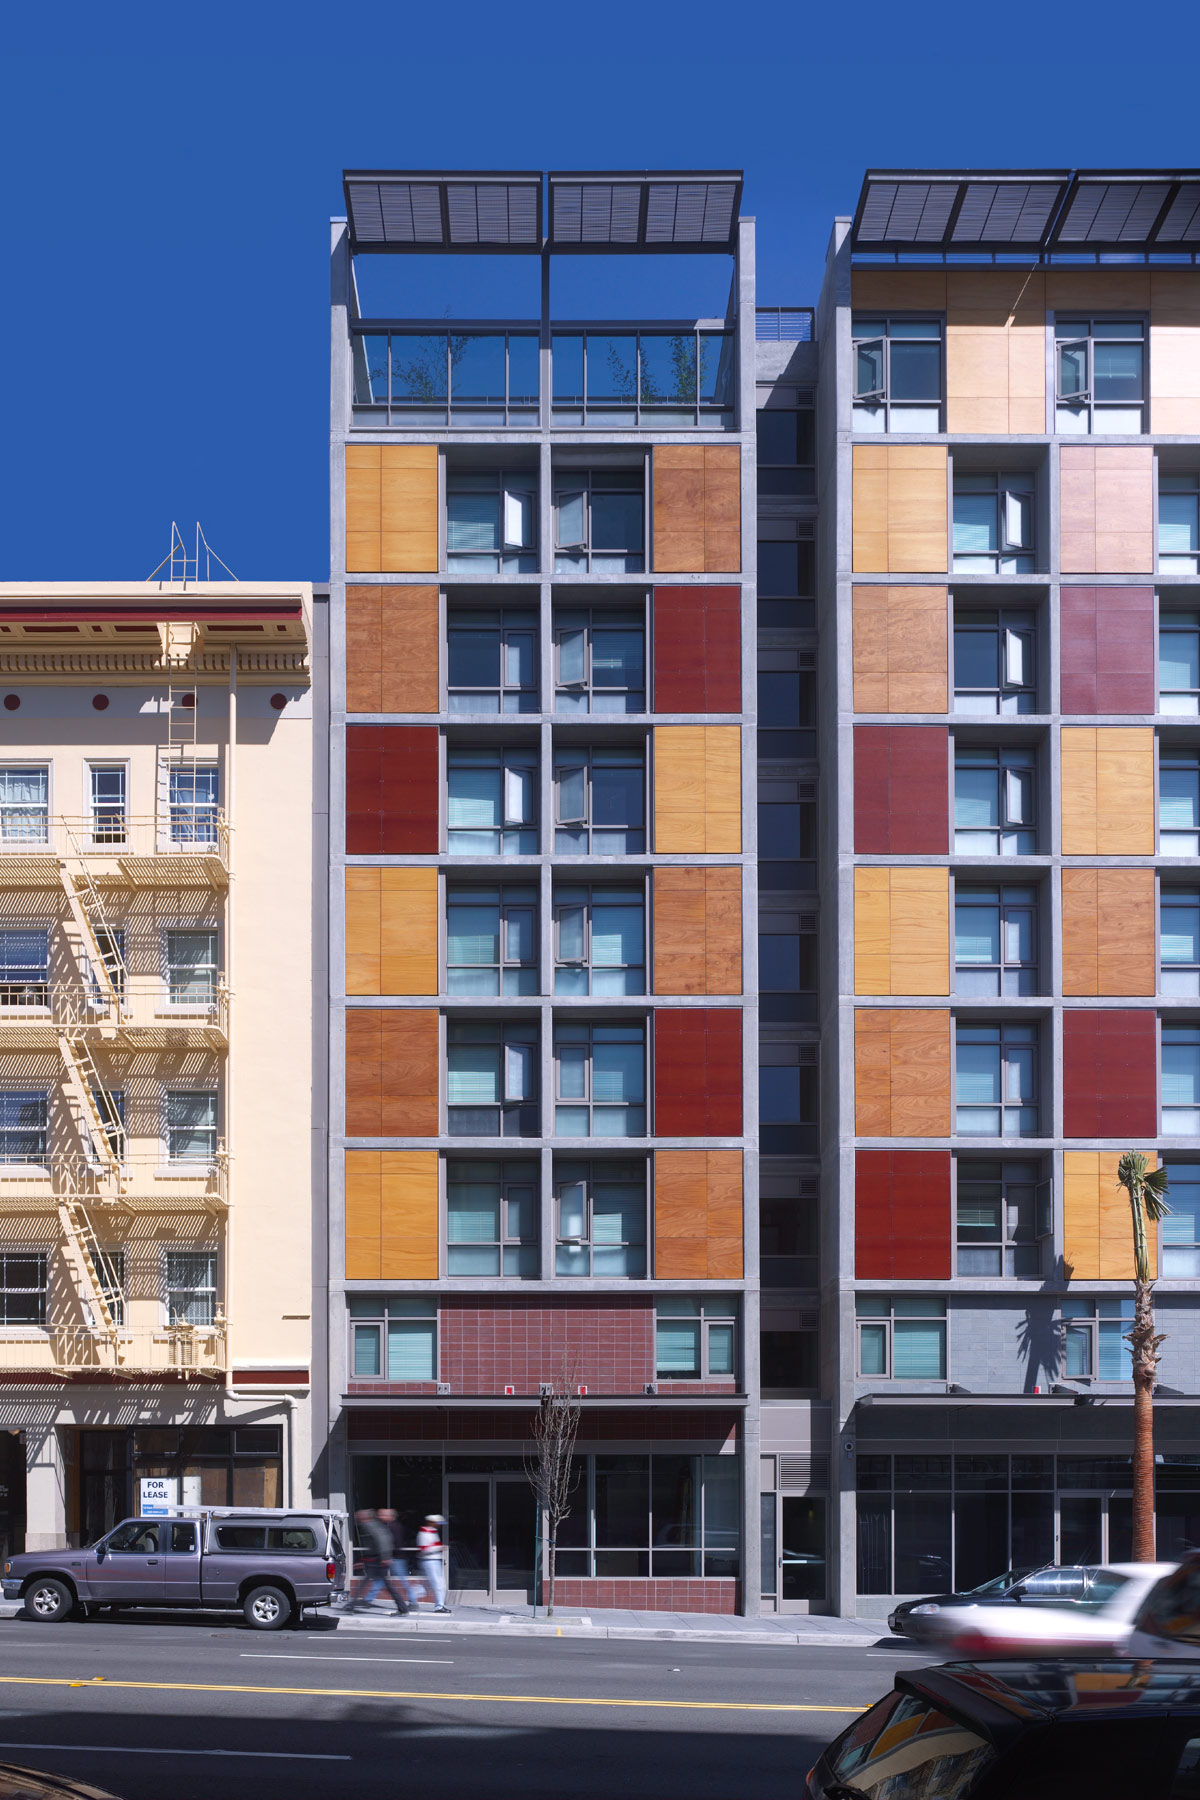 The Plaza Apartments in San Francisco was the first new permanent housing for formerly homeless residents; located in the South of Market neighborhood, the affordable housing complex achieves a sustainable goal of being certified LEED Silver and includes supportive services for residents.